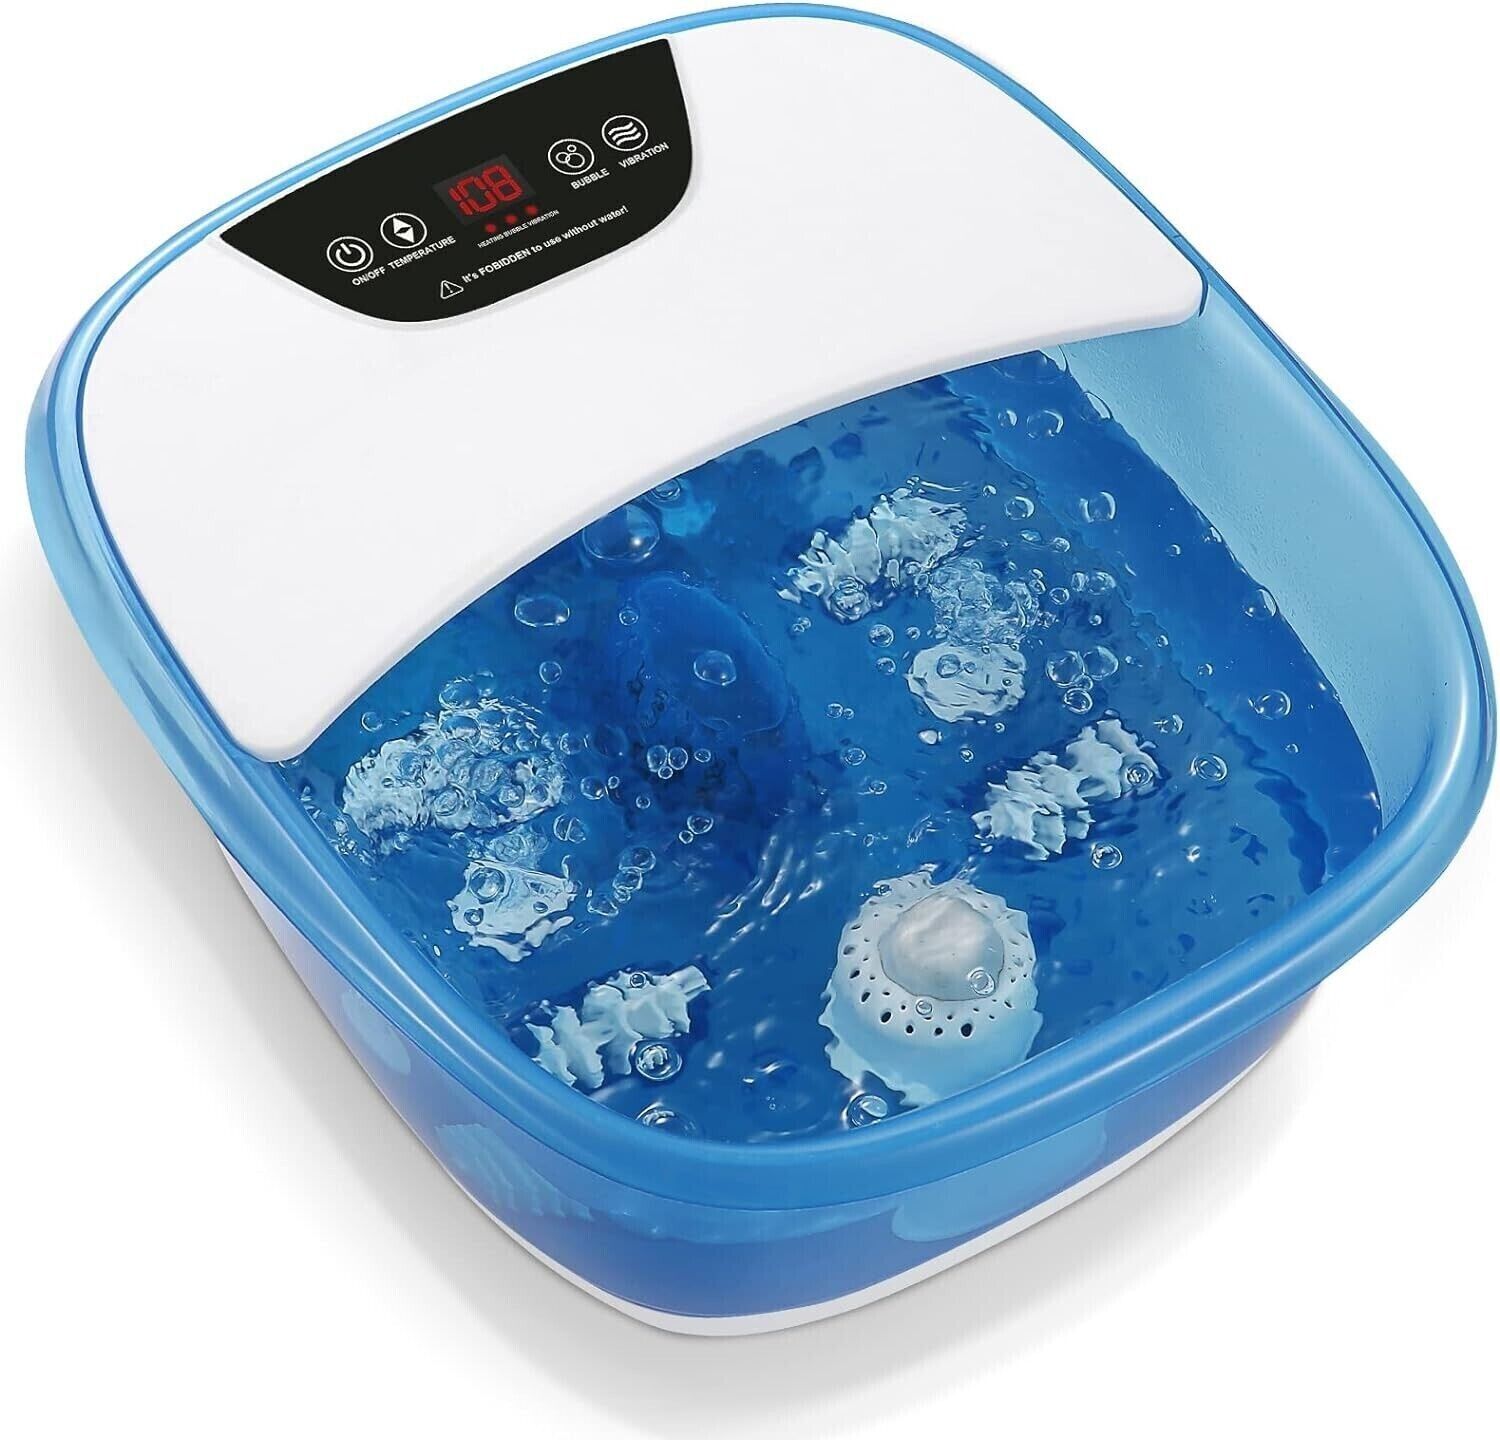 Foot Spa Massager with Bubbles Vibration Grinding Stone 4 Massage Rollers JX1